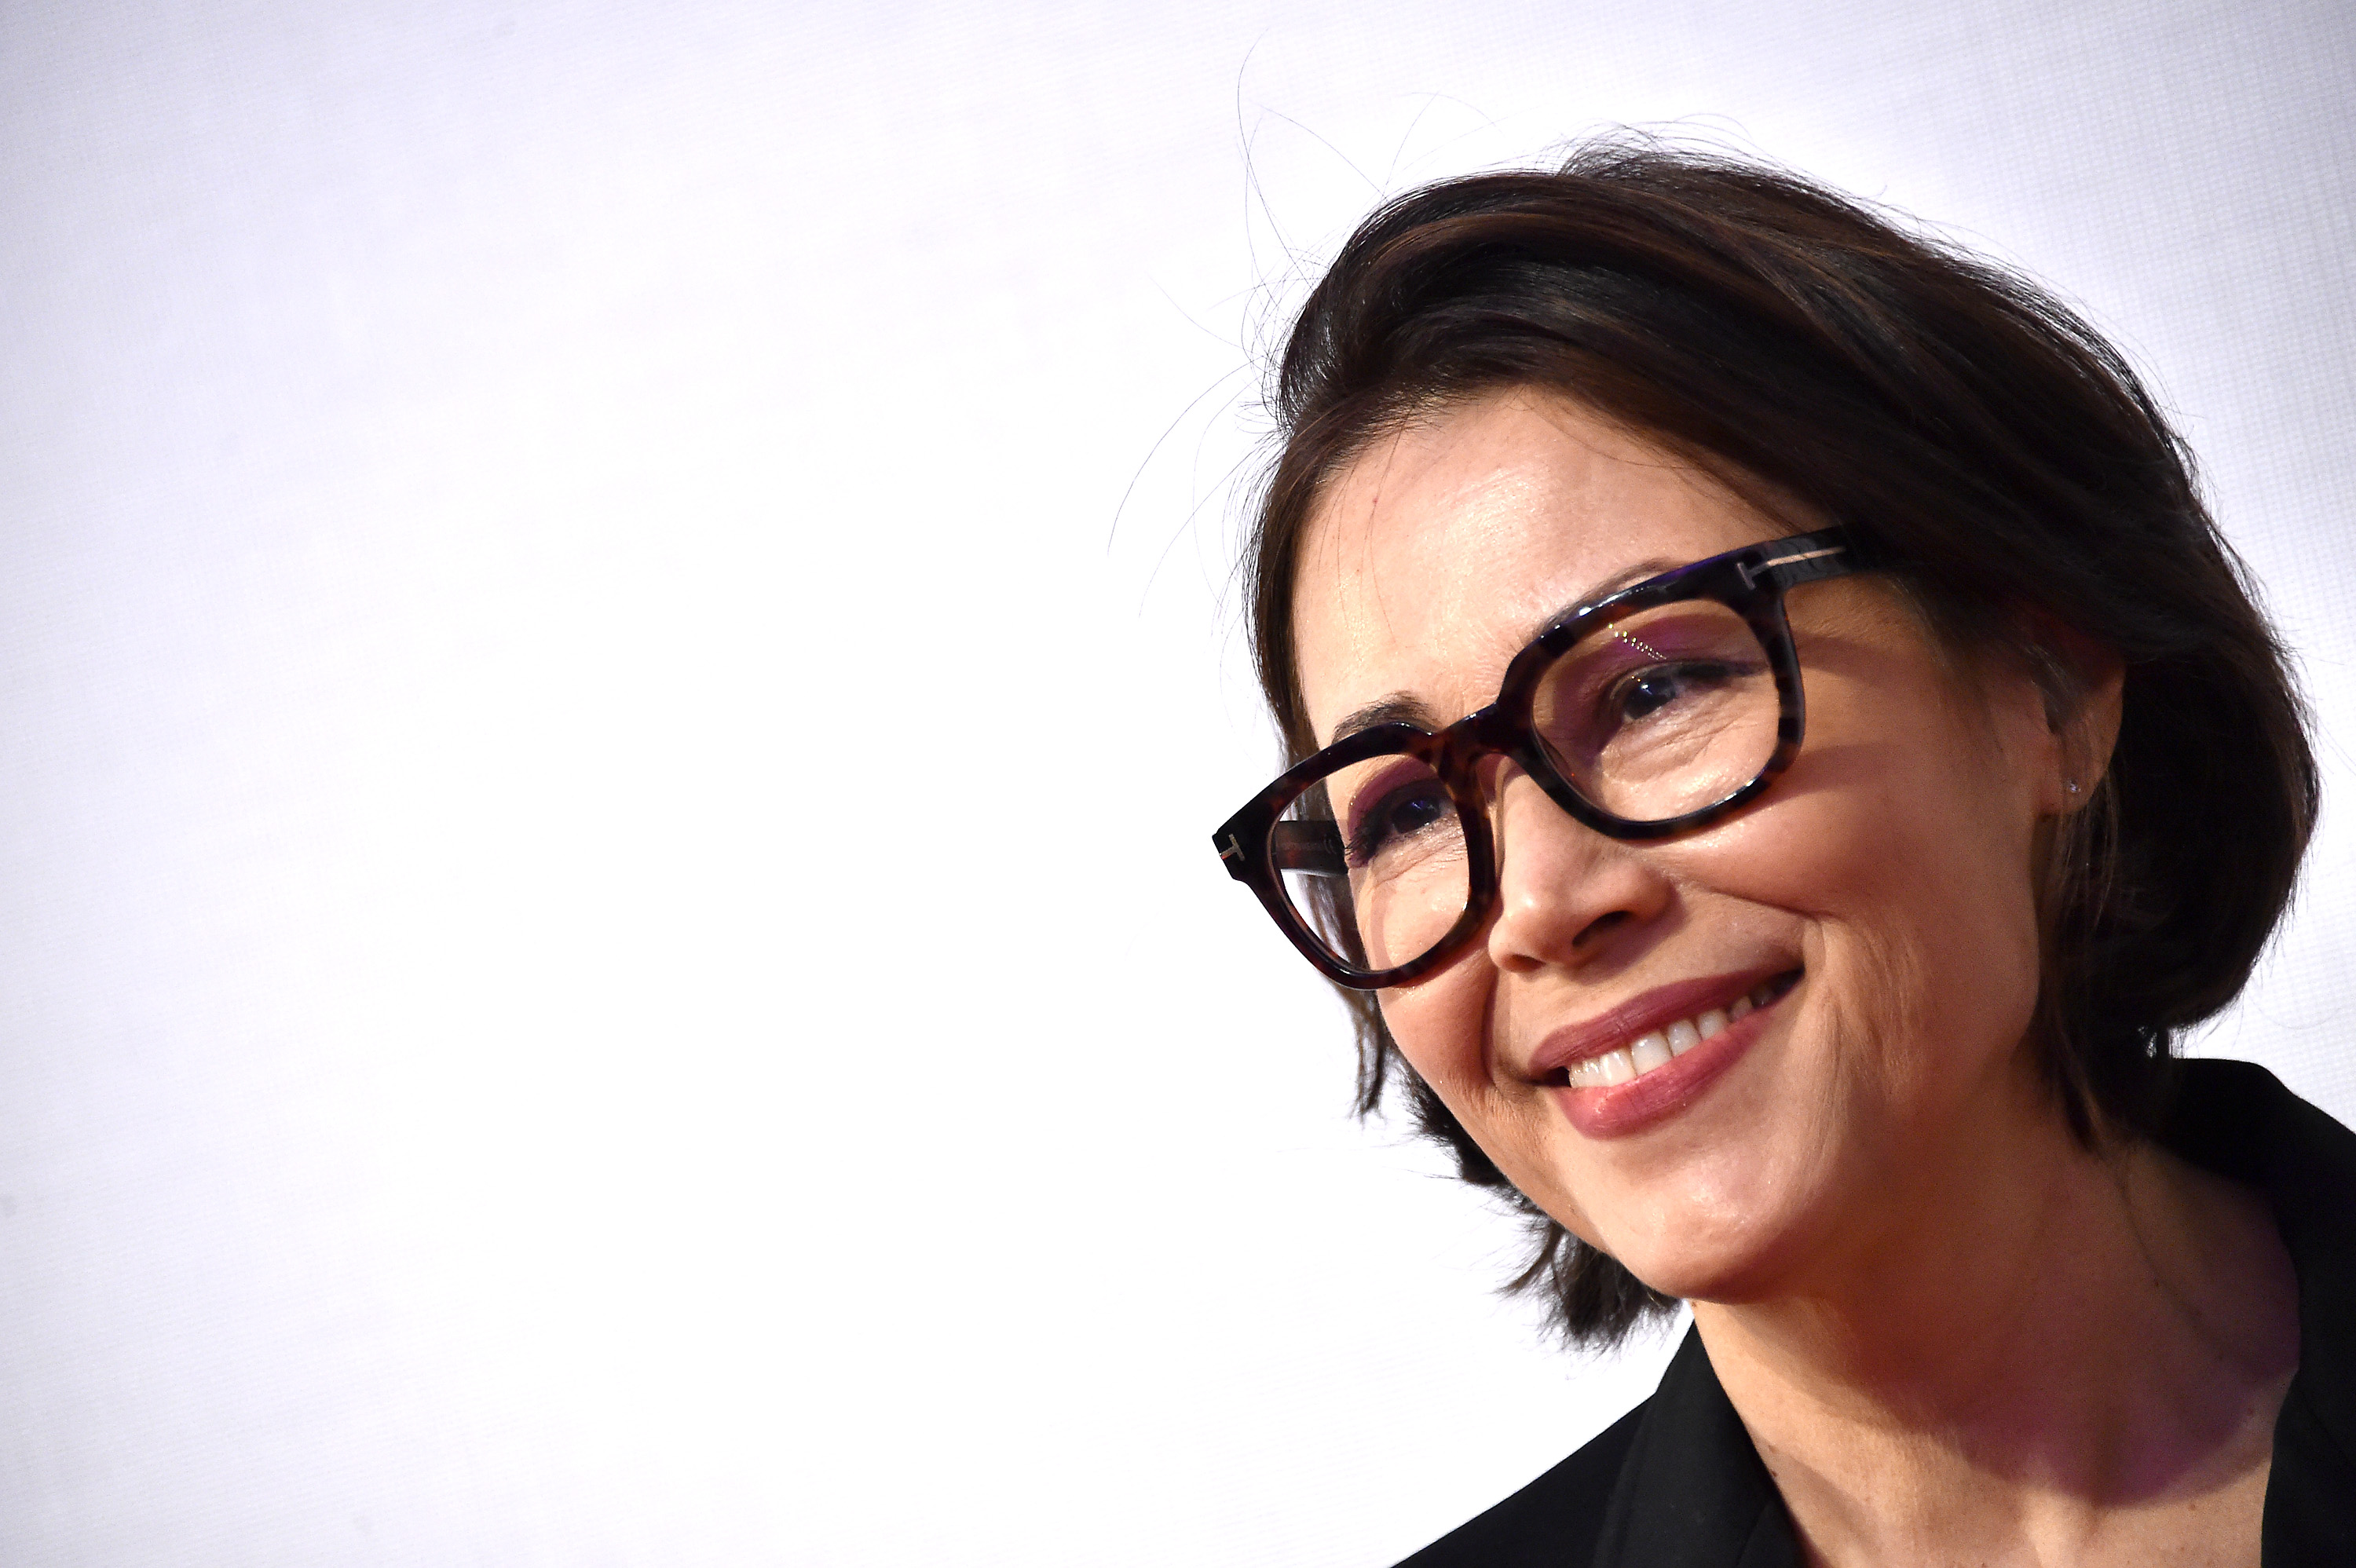 Ann Curry at the 2016 Tribeca Film Festival in New York on April 18, 2016. (Mike Coppola—Tribeca Film Festival/Getty Images)